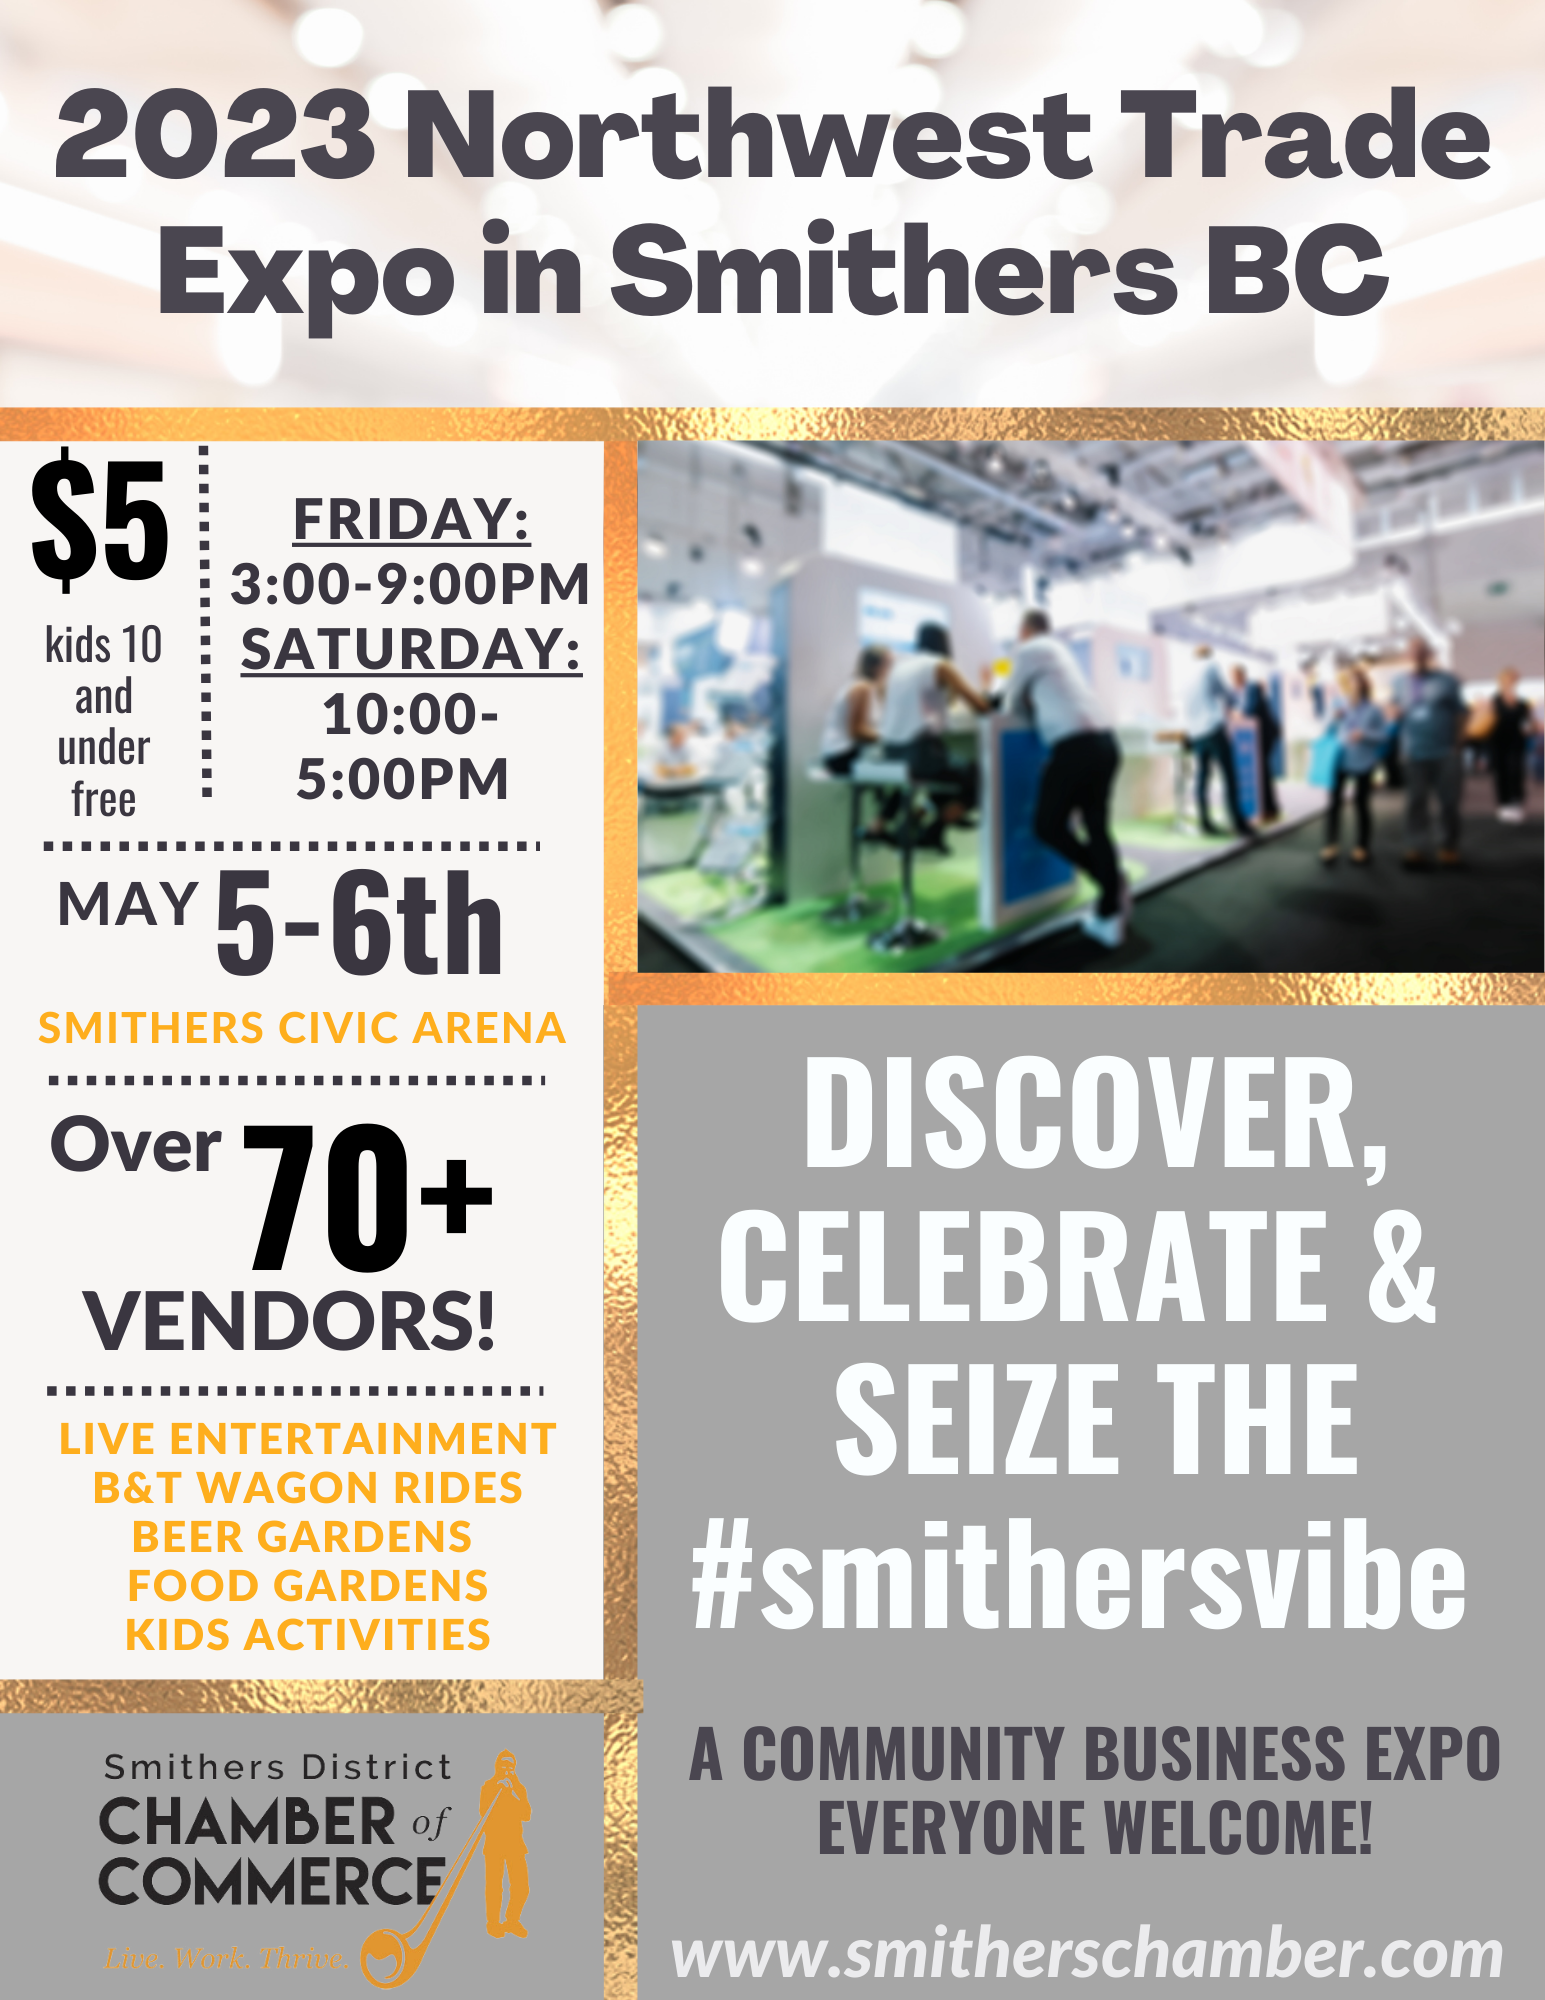 2023 Northwest Trade Expo in Smithers BC